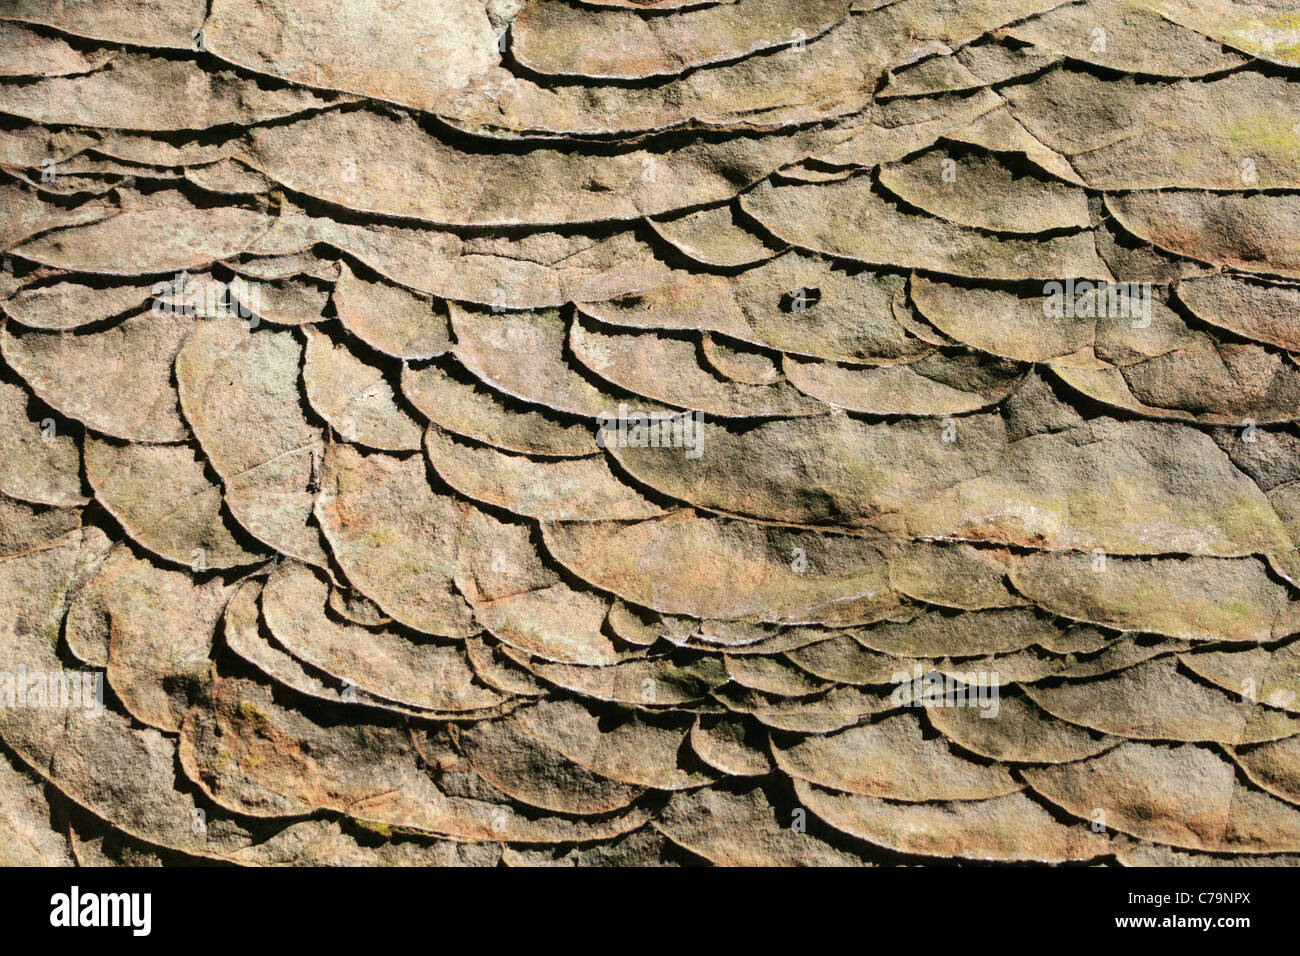 sandstone-rock-surface-with-limonite-rid